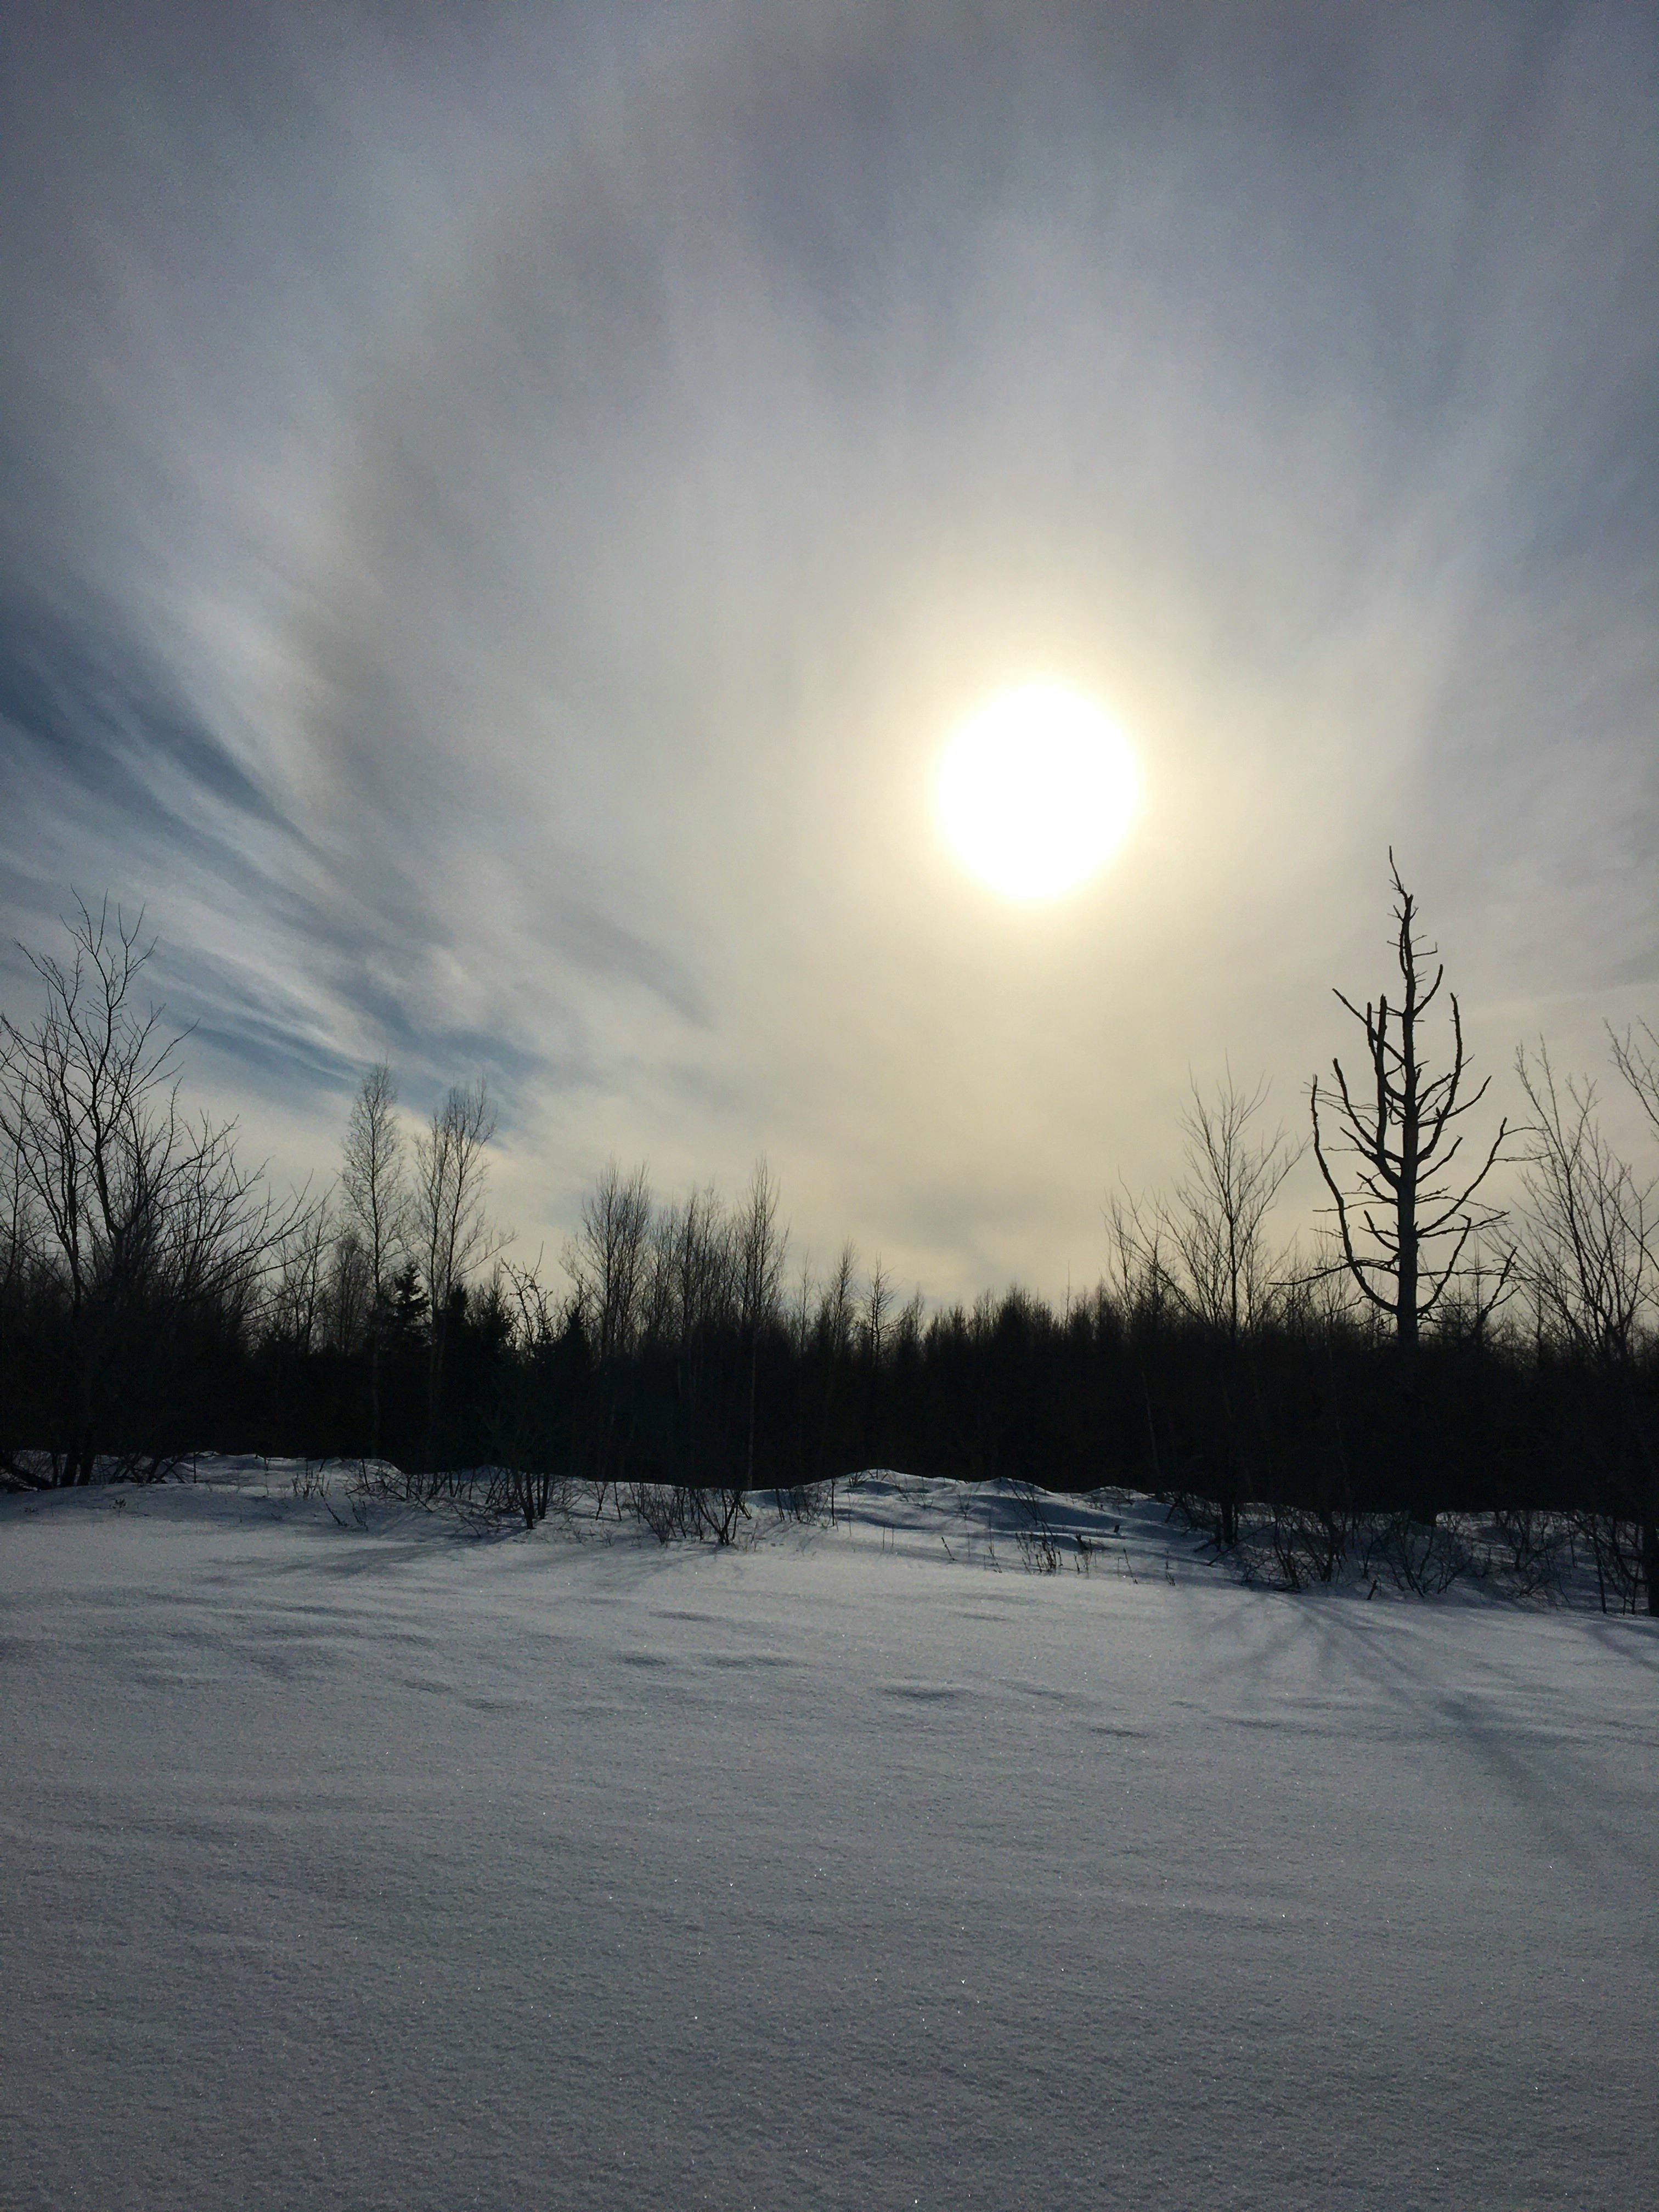 Barry Cottam captured this pre-sunset shot while out for an afternoon of snowshoeing in Corraville, P.E.I. The high-level cirrus clouds created the perfect silhouette just before day’s end. We must take advantage of the sunshine we get – it’s few and far between these days. Thanks for sharing, Barry.